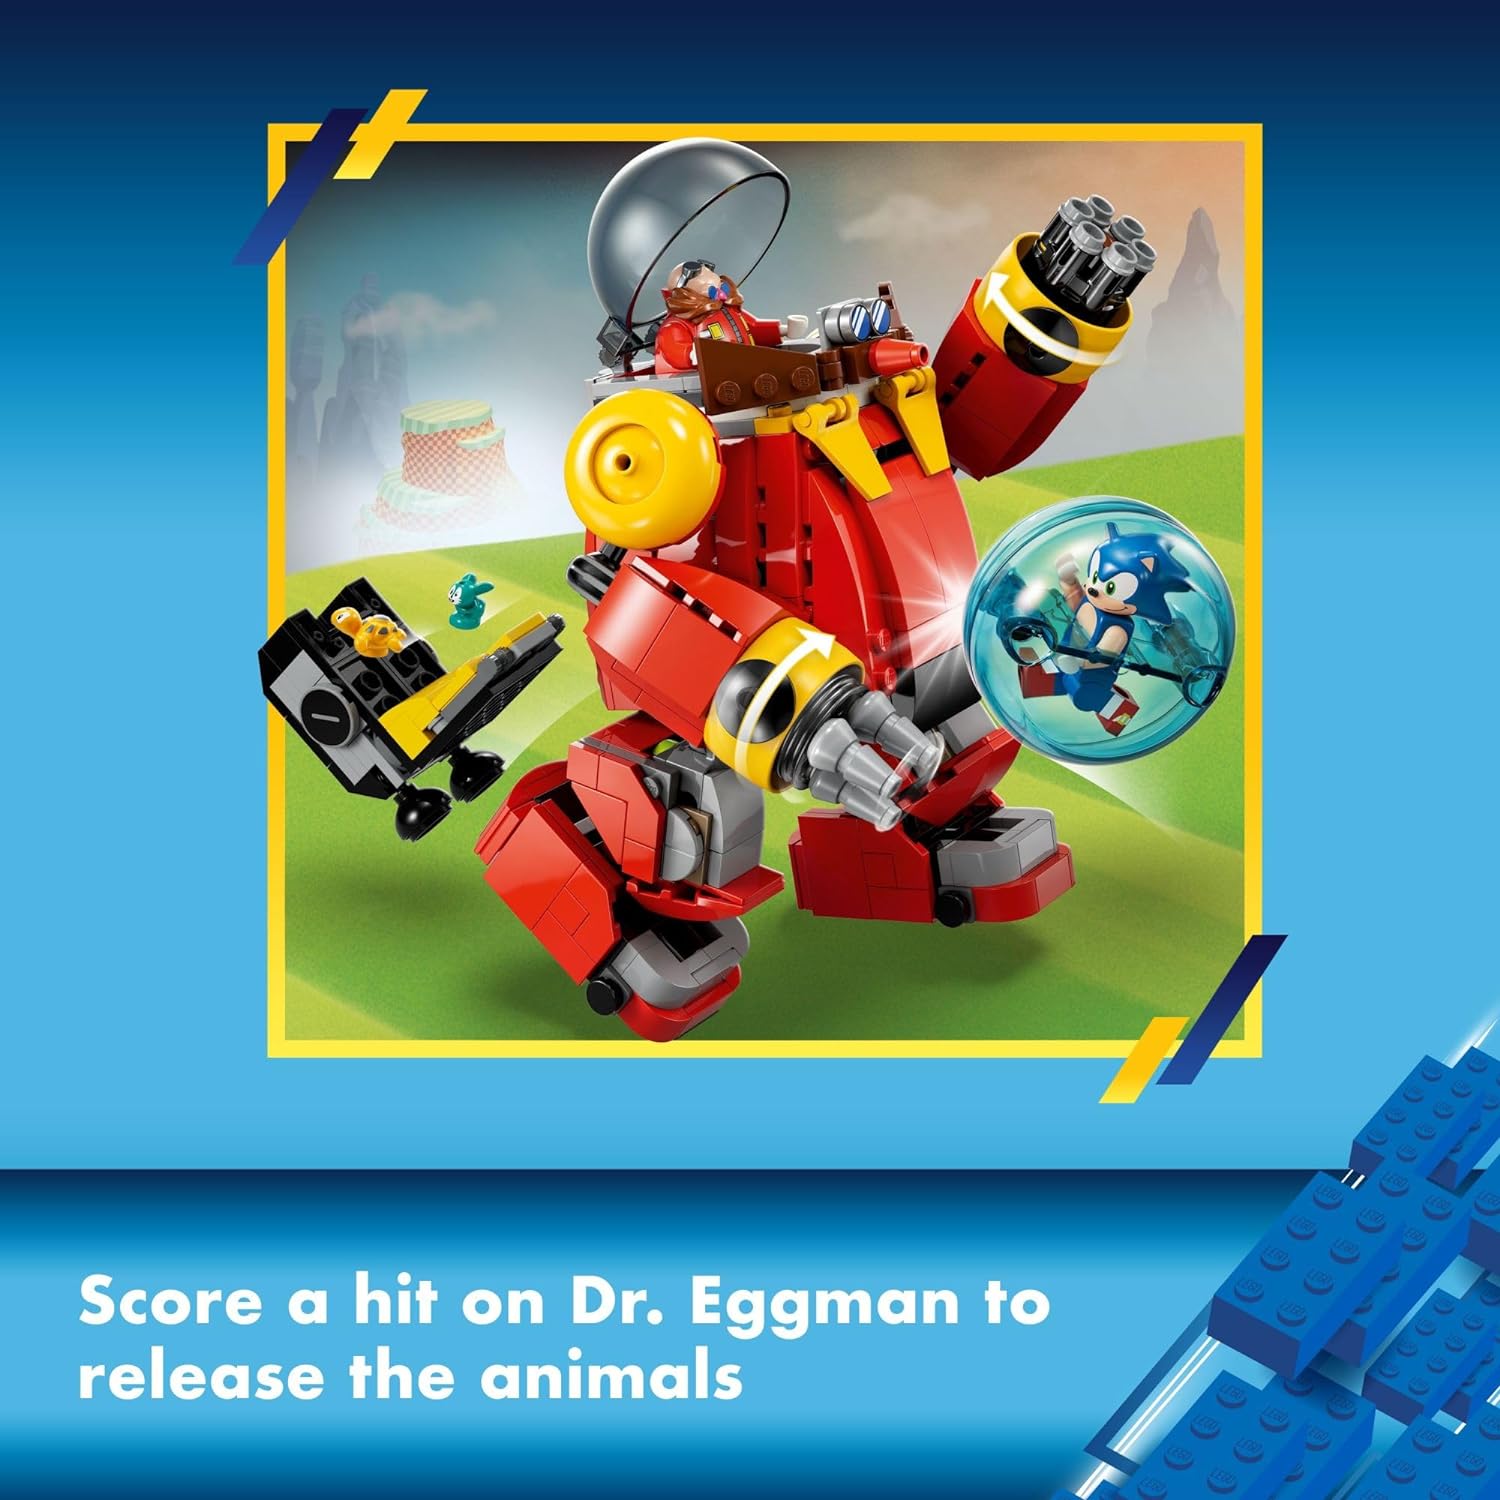 LEGO 76993 Sonic The Hedgehog Sonic vs. Dr. Eggman’s Death Egg Robot Building Toy for Sonic Fans and 8 Year Old Gamers, Includes Speed Sphere and Launcher Plus 6 Sonic Figures for Creative Role Play